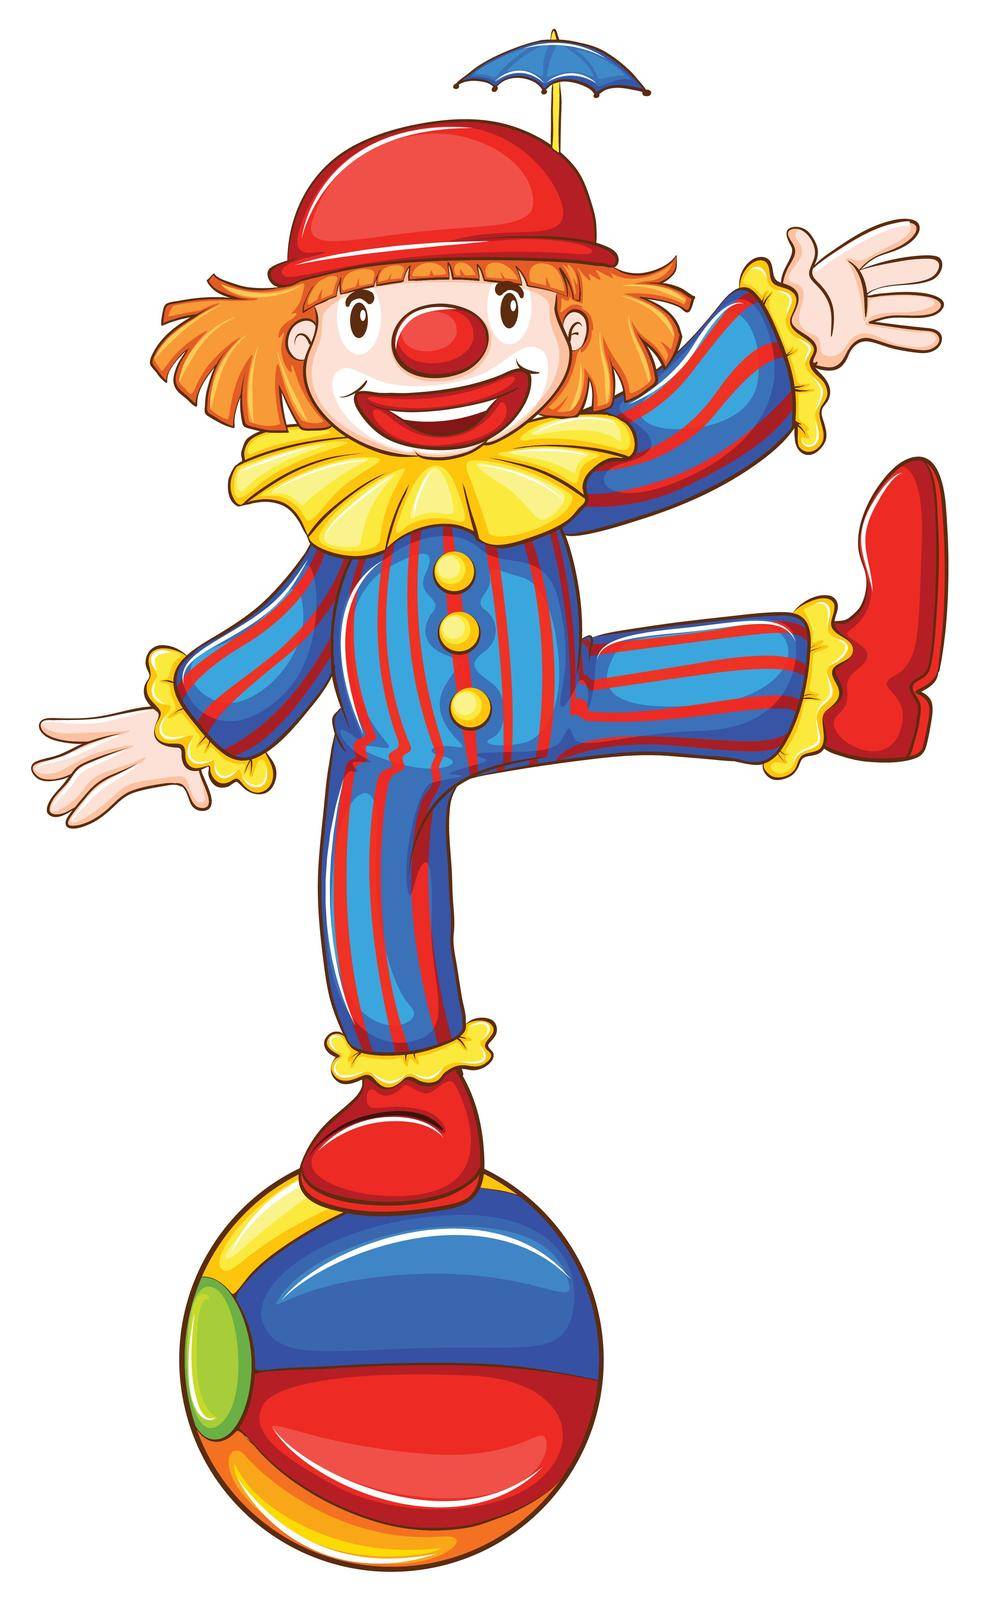 Illustration of a simple drawing of a playful clown on a white background